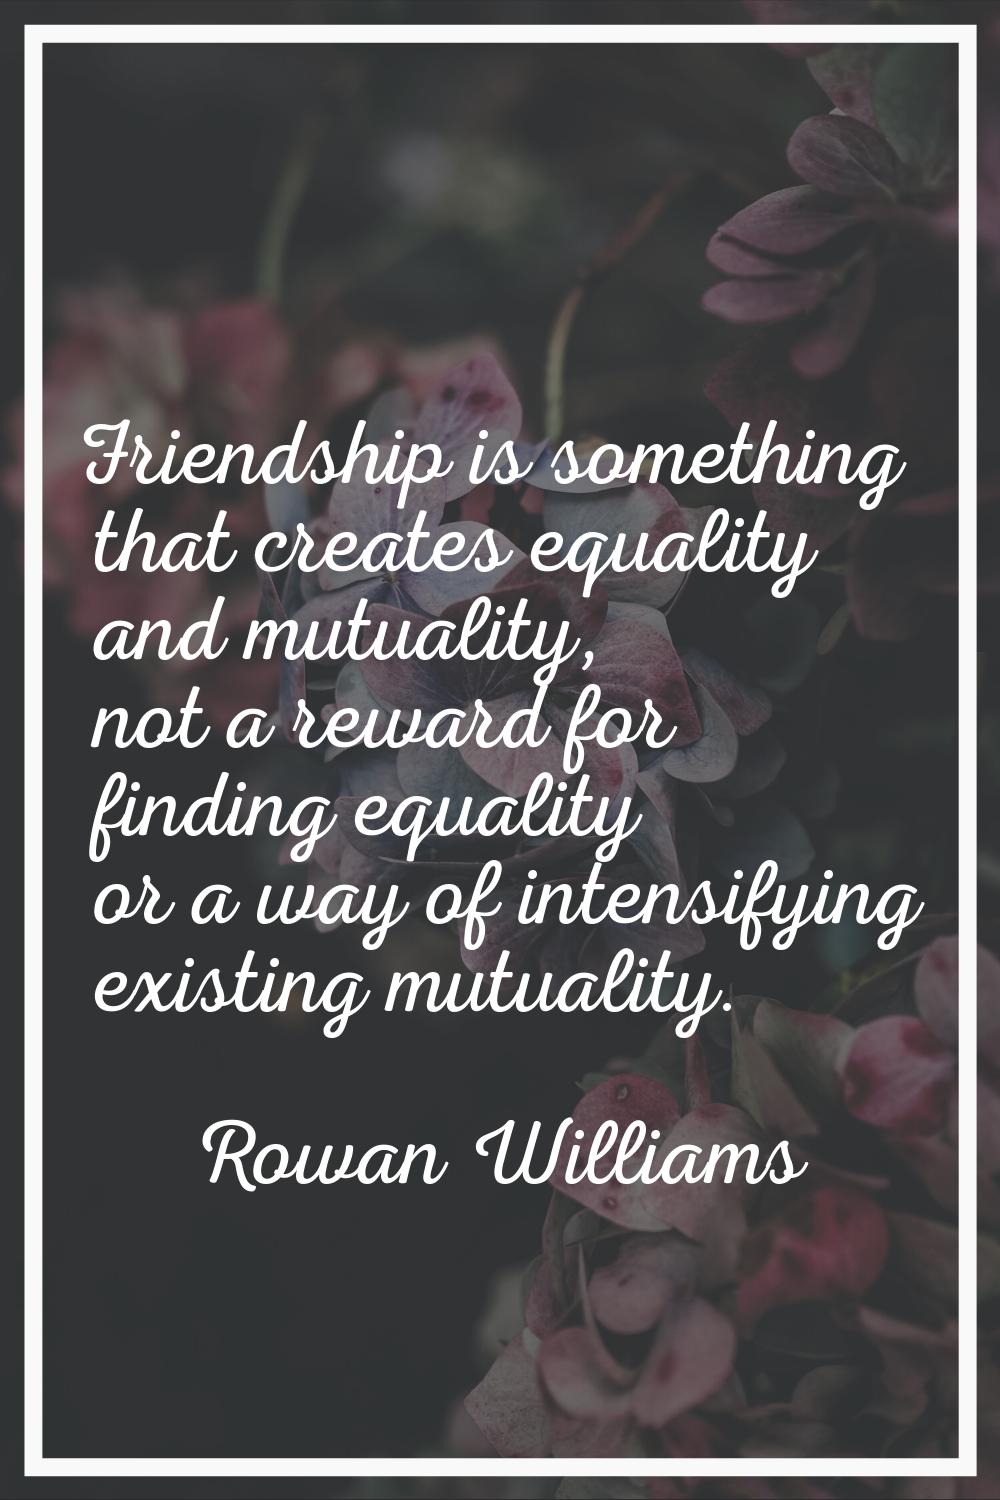 Friendship is something that creates equality and mutuality, not a reward for finding equality or a